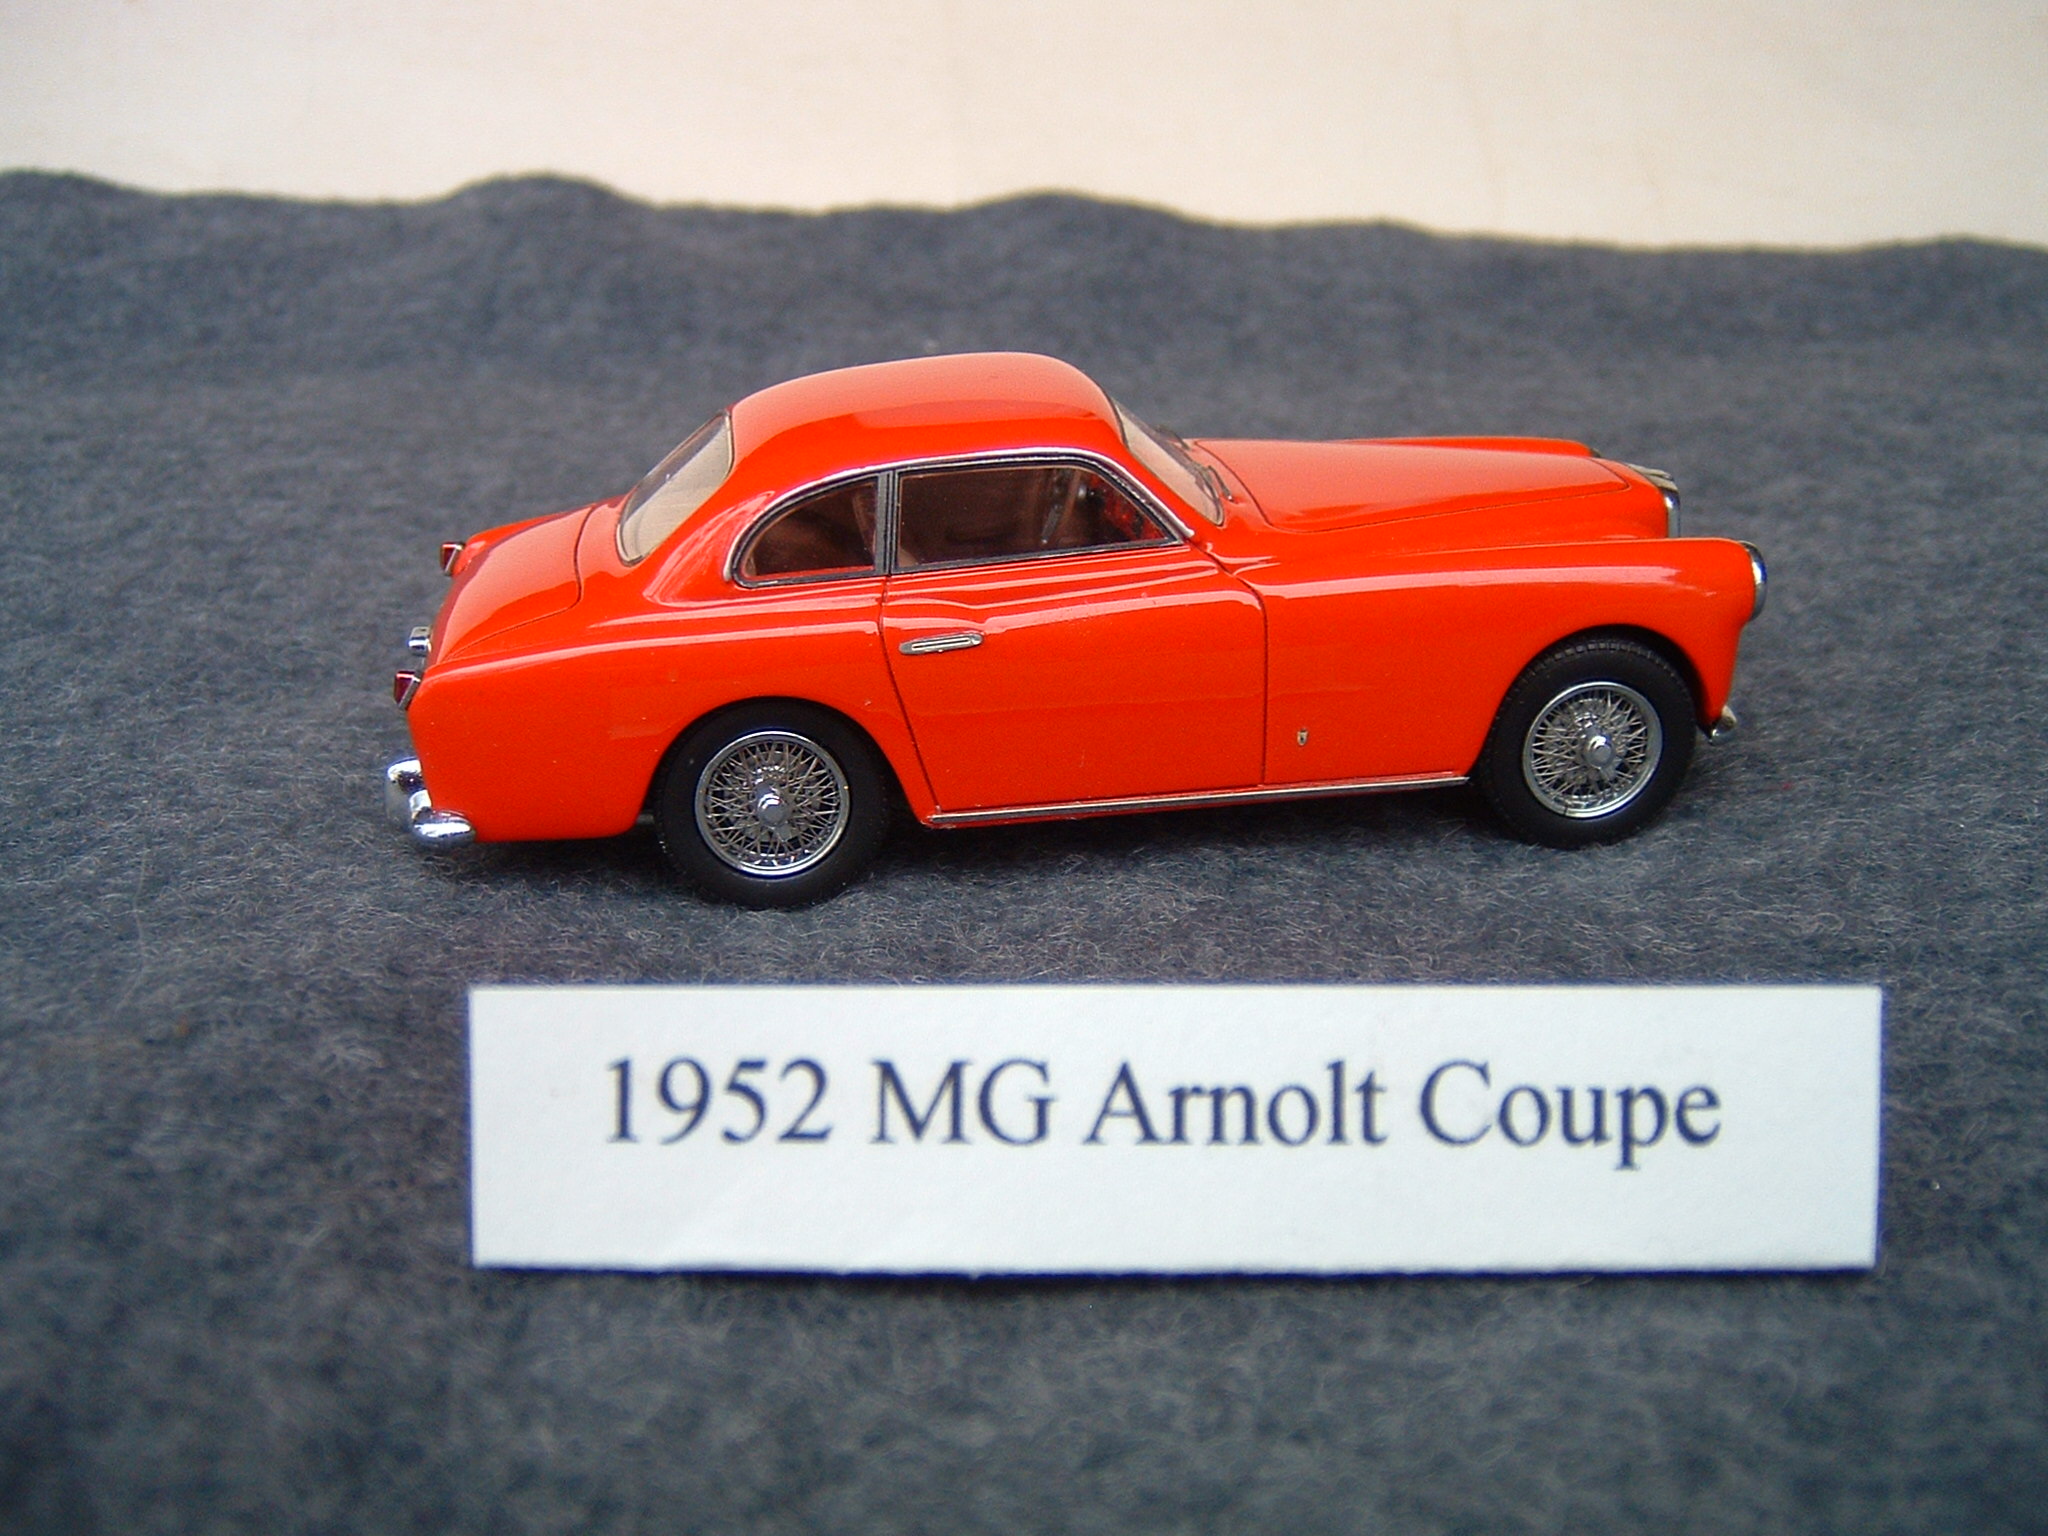 1952 MG Arnolt Coupe